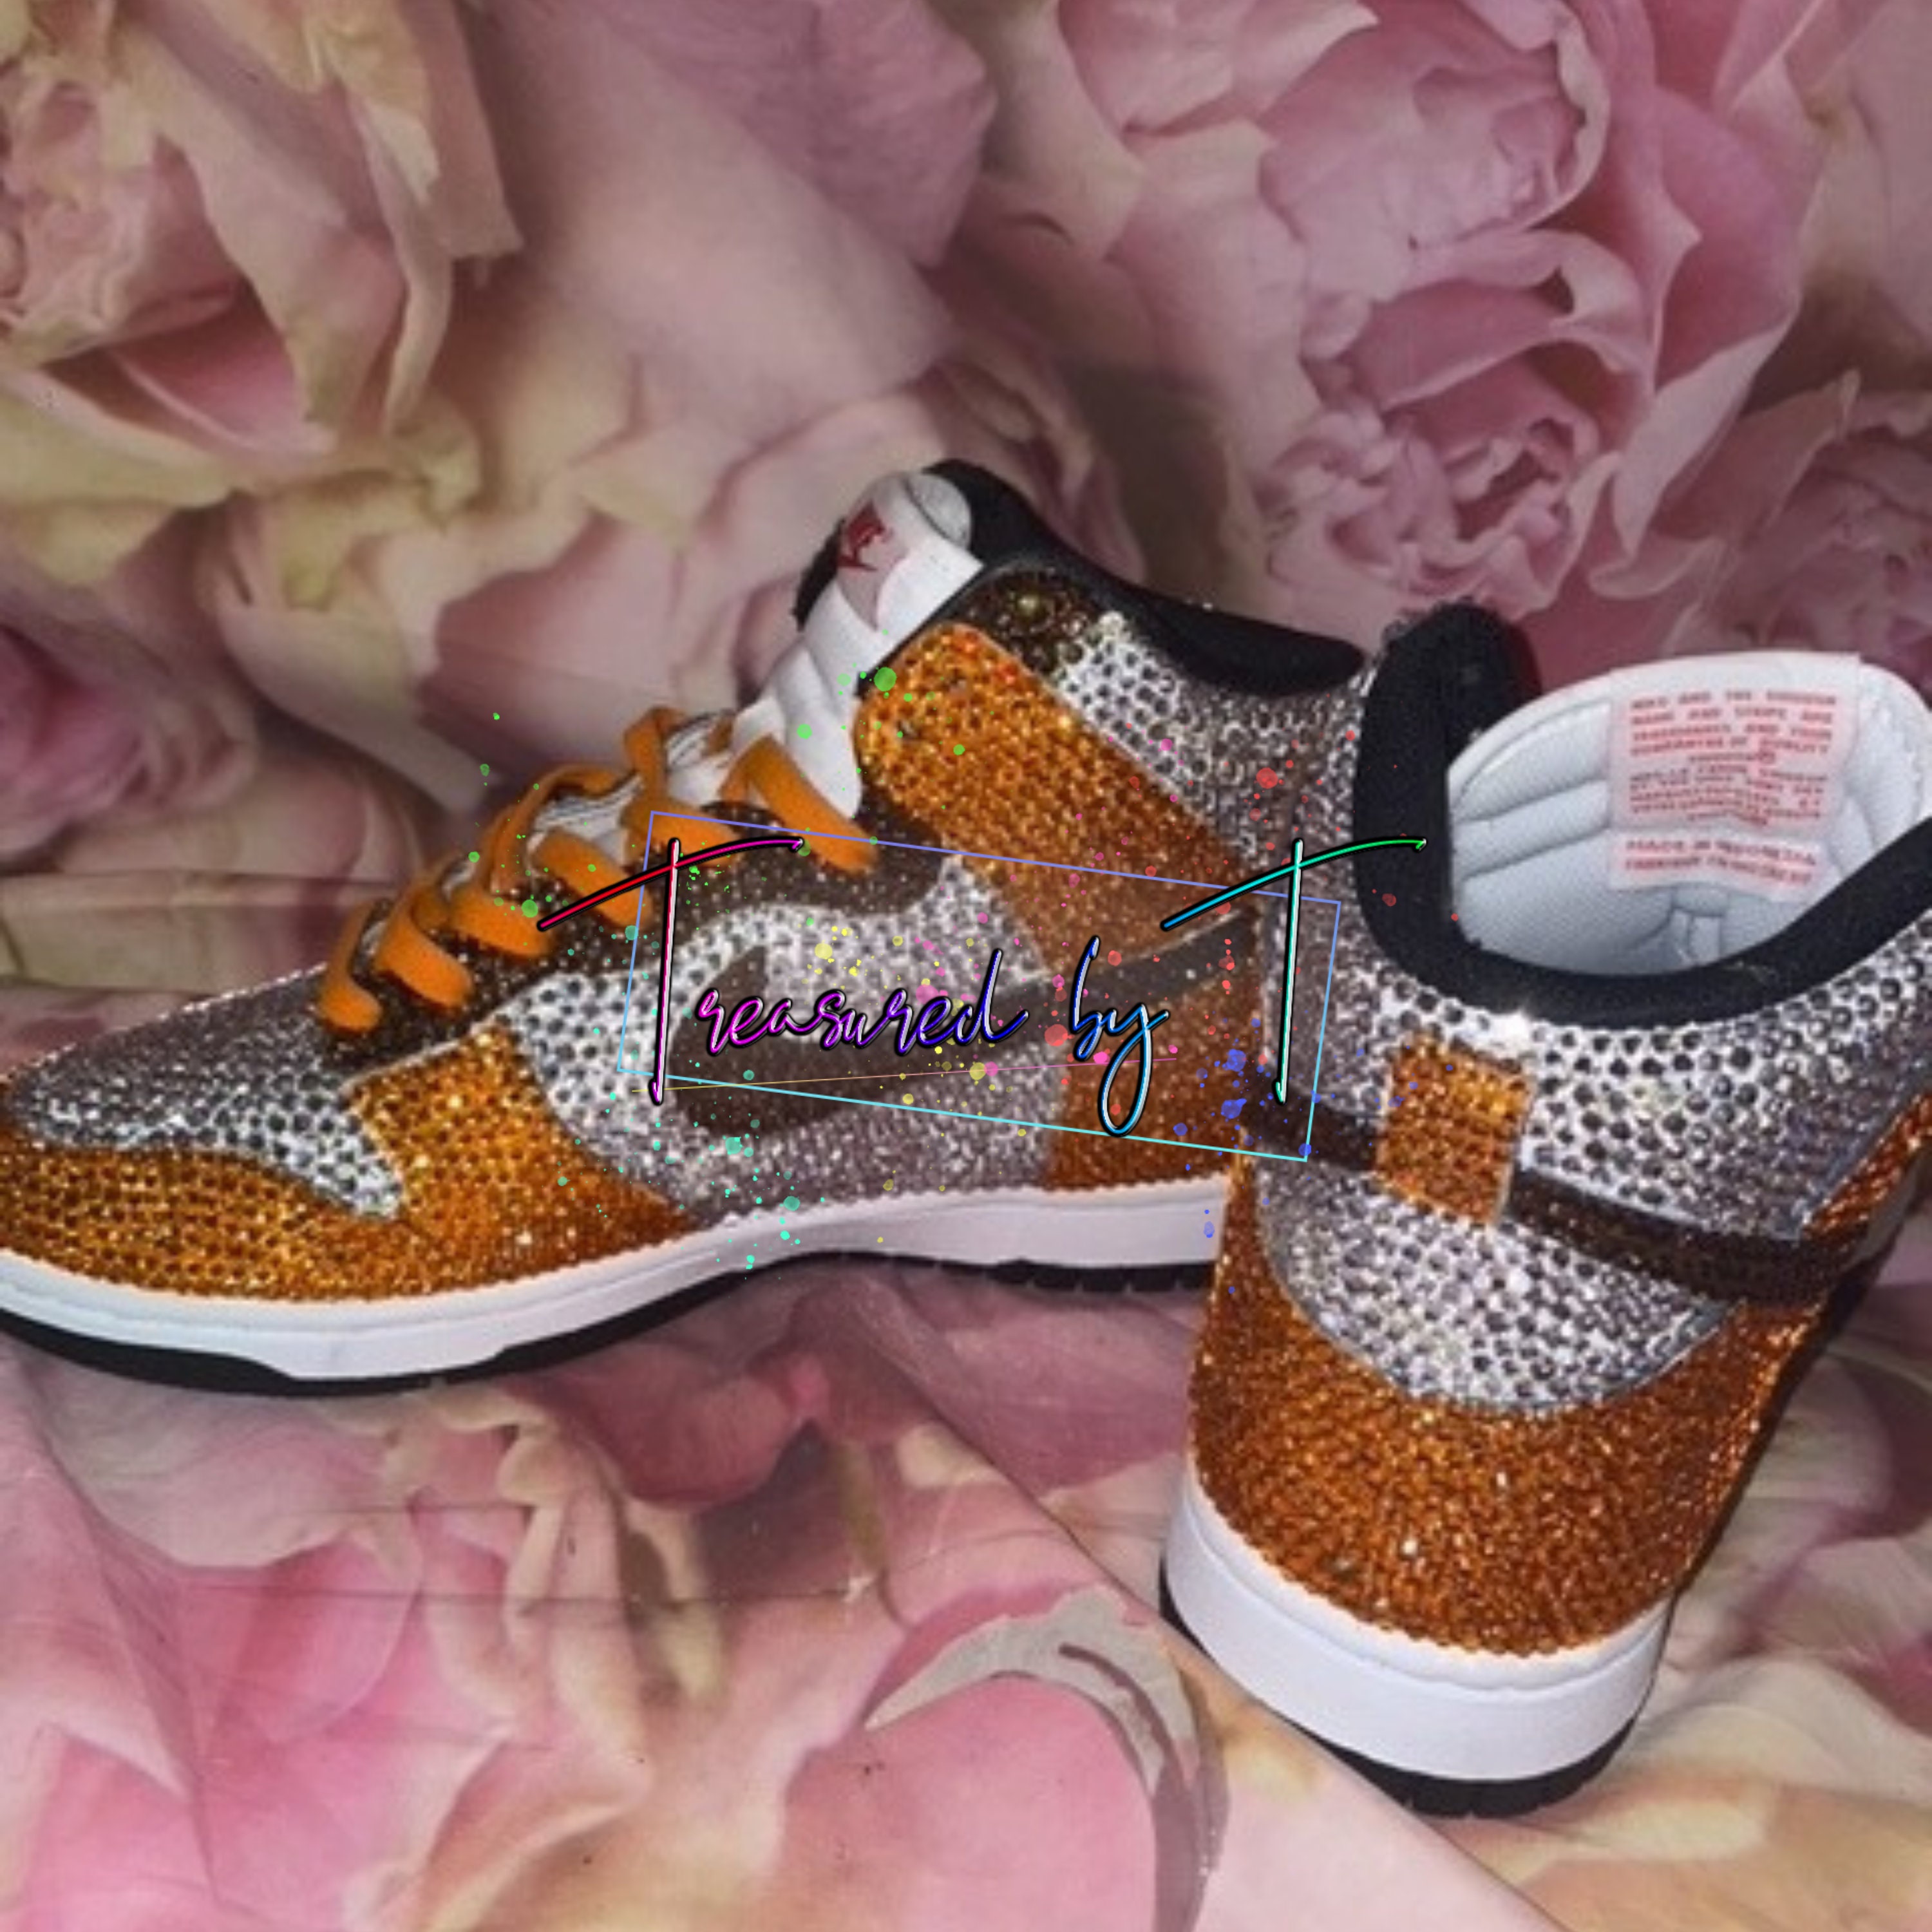 Buy Custom Nike Crystallized Classic Cortez Women's Sneakers Bling Genuine  European Crystals Bedazzled White, made to order from CRYSTALL!ZED by Bri,  LLC